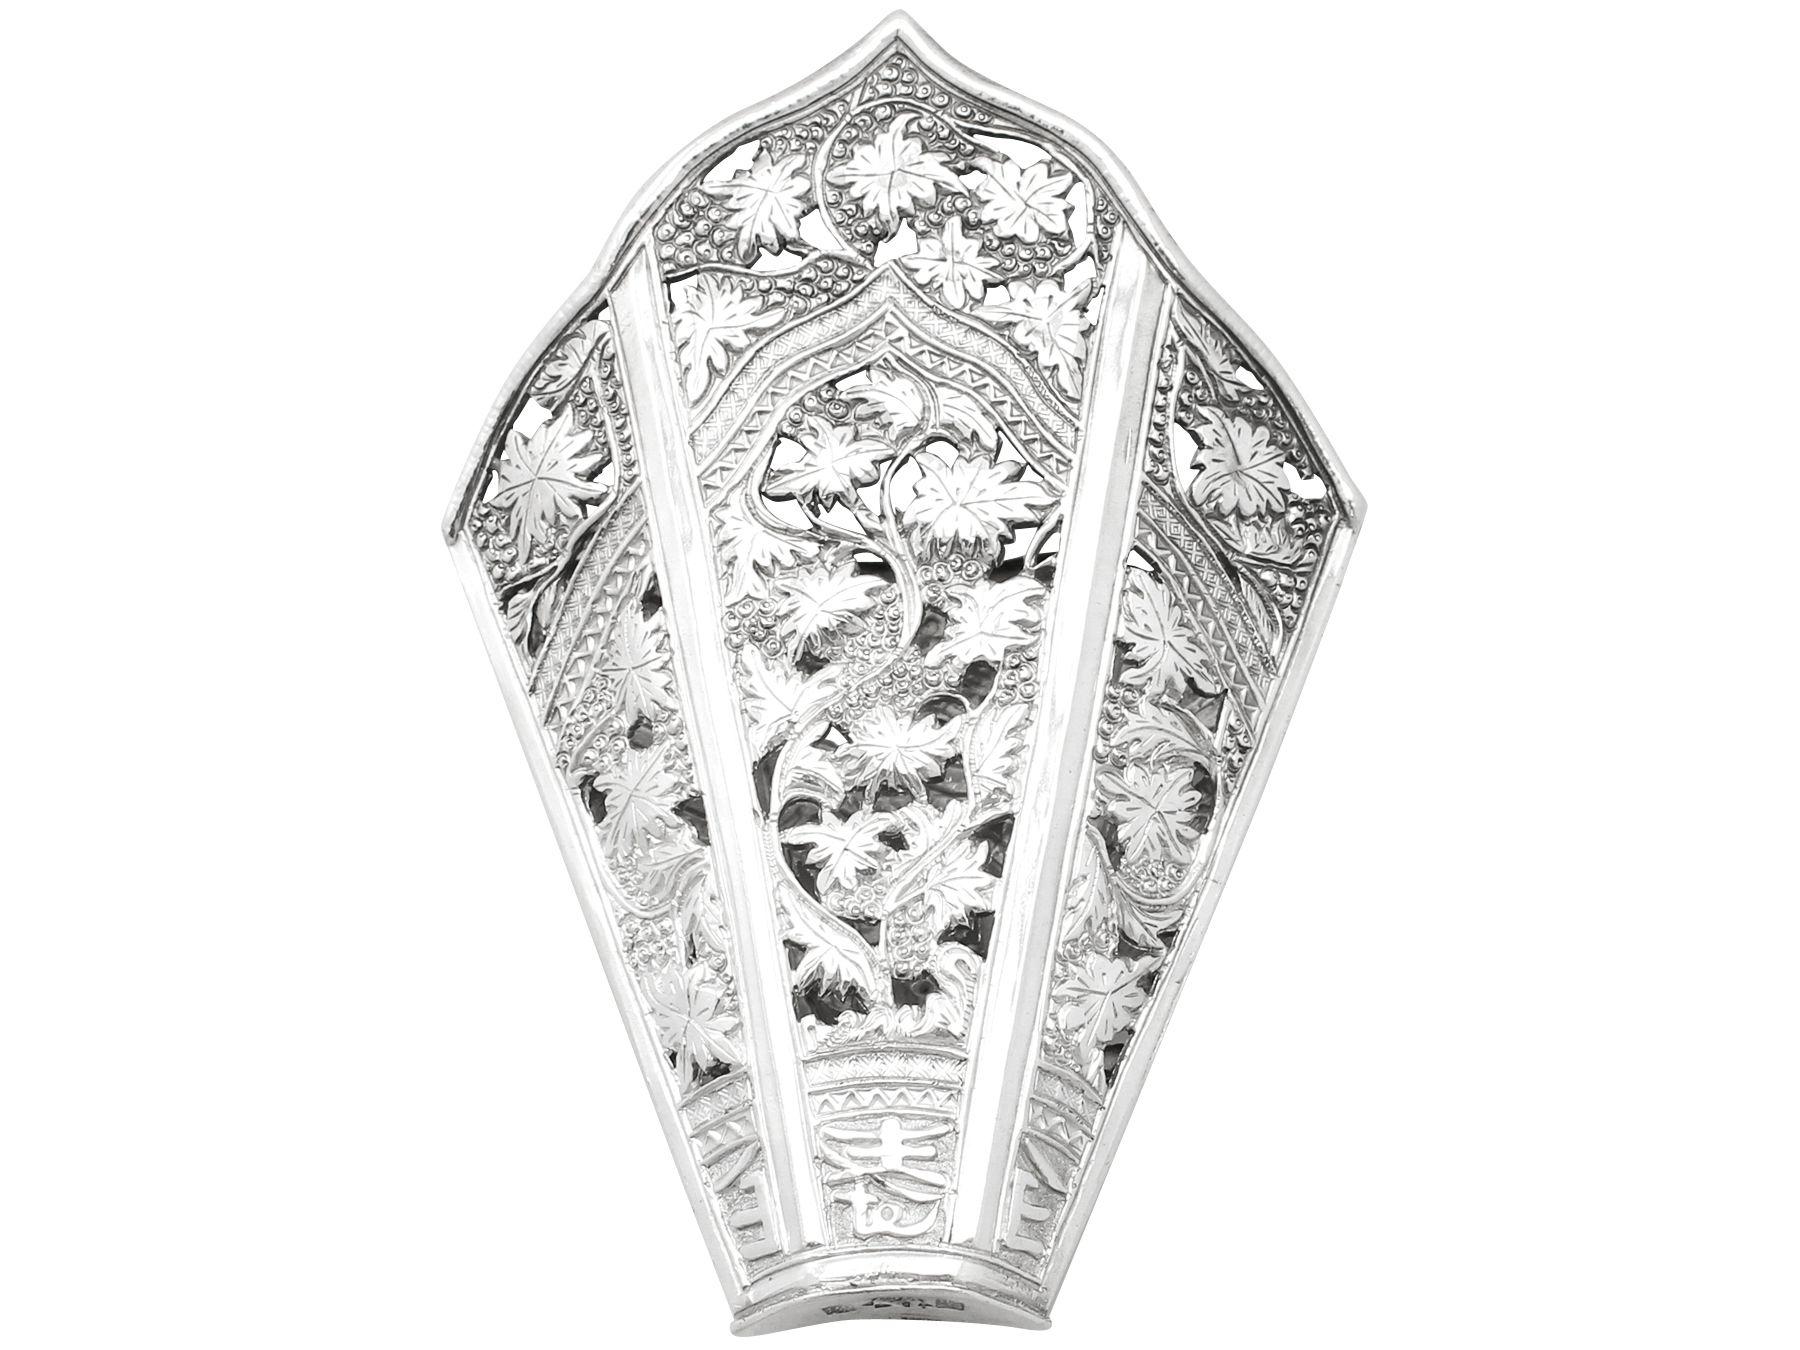 A fine and impressive antique Peranakan silver bekas sirih/sirih leaf holder; an addition to our Asian silverware collection.

This fine antique Peranakan silver bekas sirih/sirih leaf holder* has a tapering paneled fan shaped form.

The two